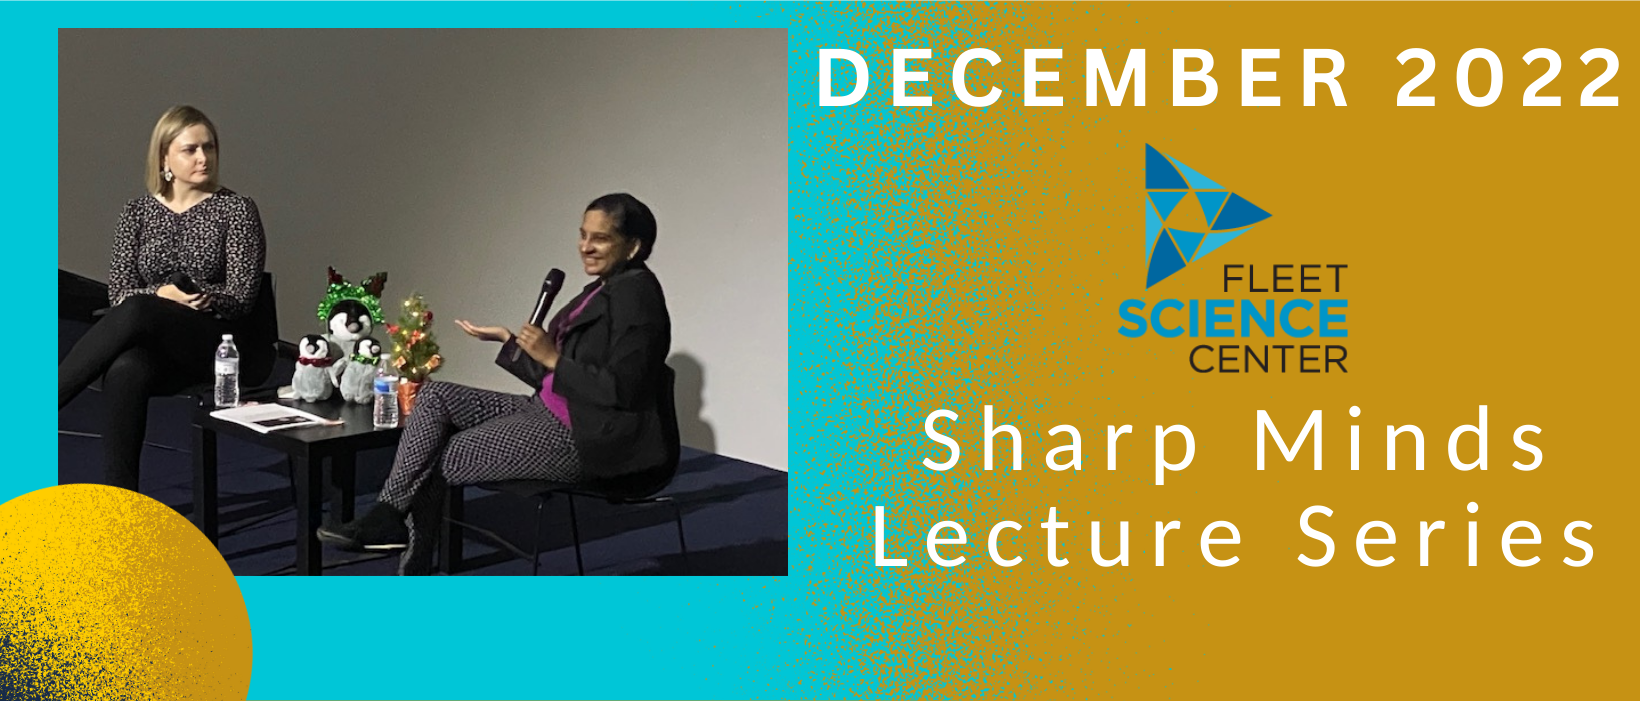 5 of 5, Ramya Rajagopalan and Caryn Rubanovich sit on stage at The Fleet Science Center presenting the 2022 December Sharp Minds Lecture